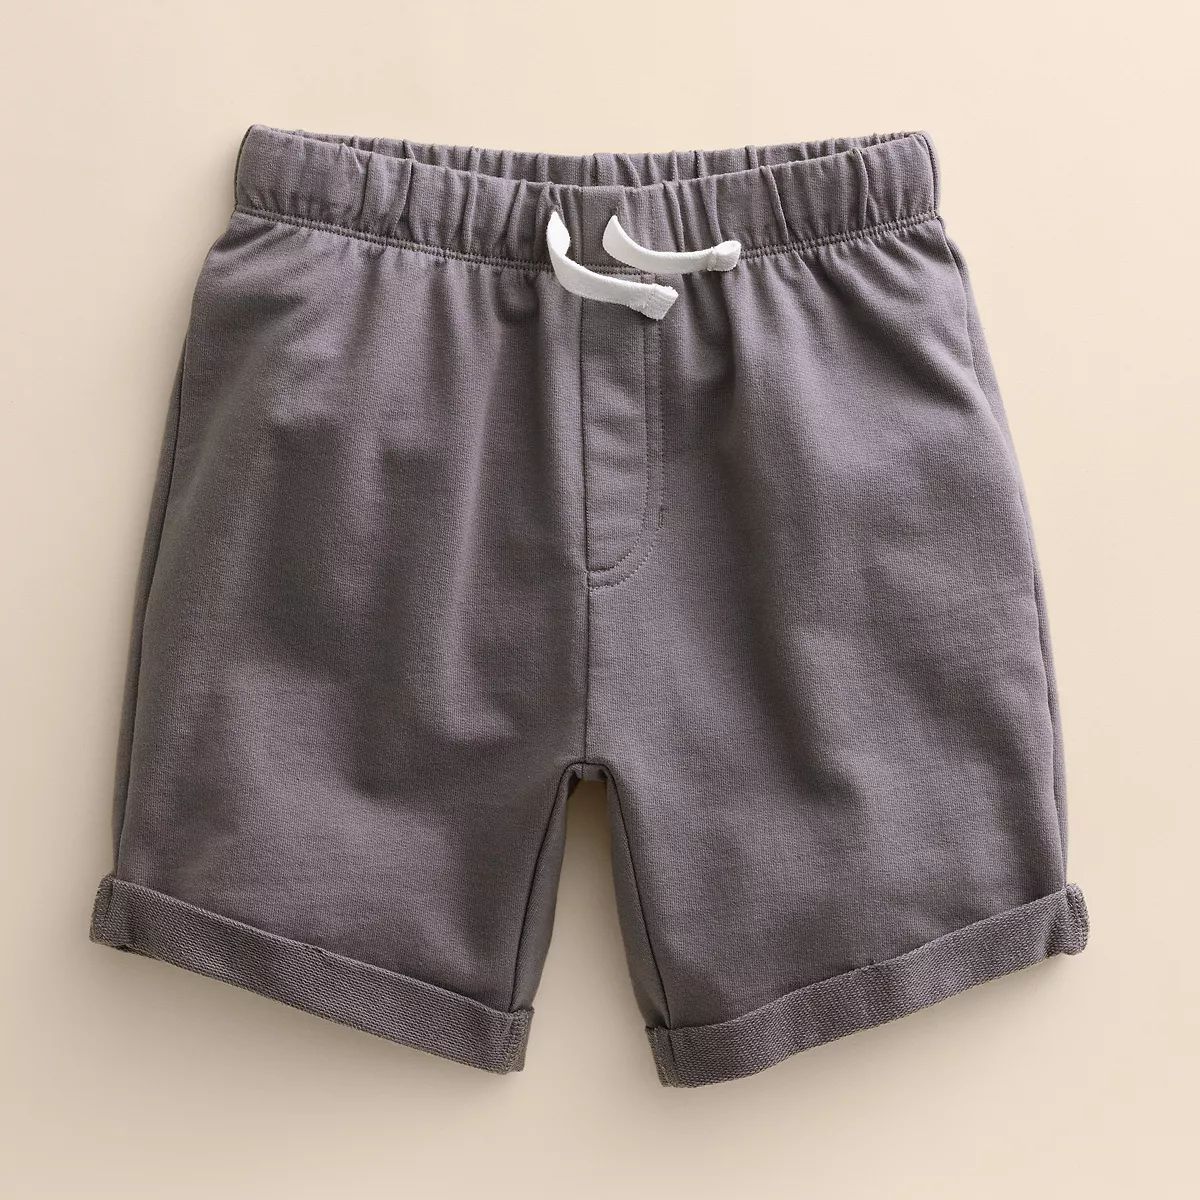 Kids 4-8 Little Co. by Lauren Conrad Organic French Terry Roll-Cuff Shorts | Kohl's